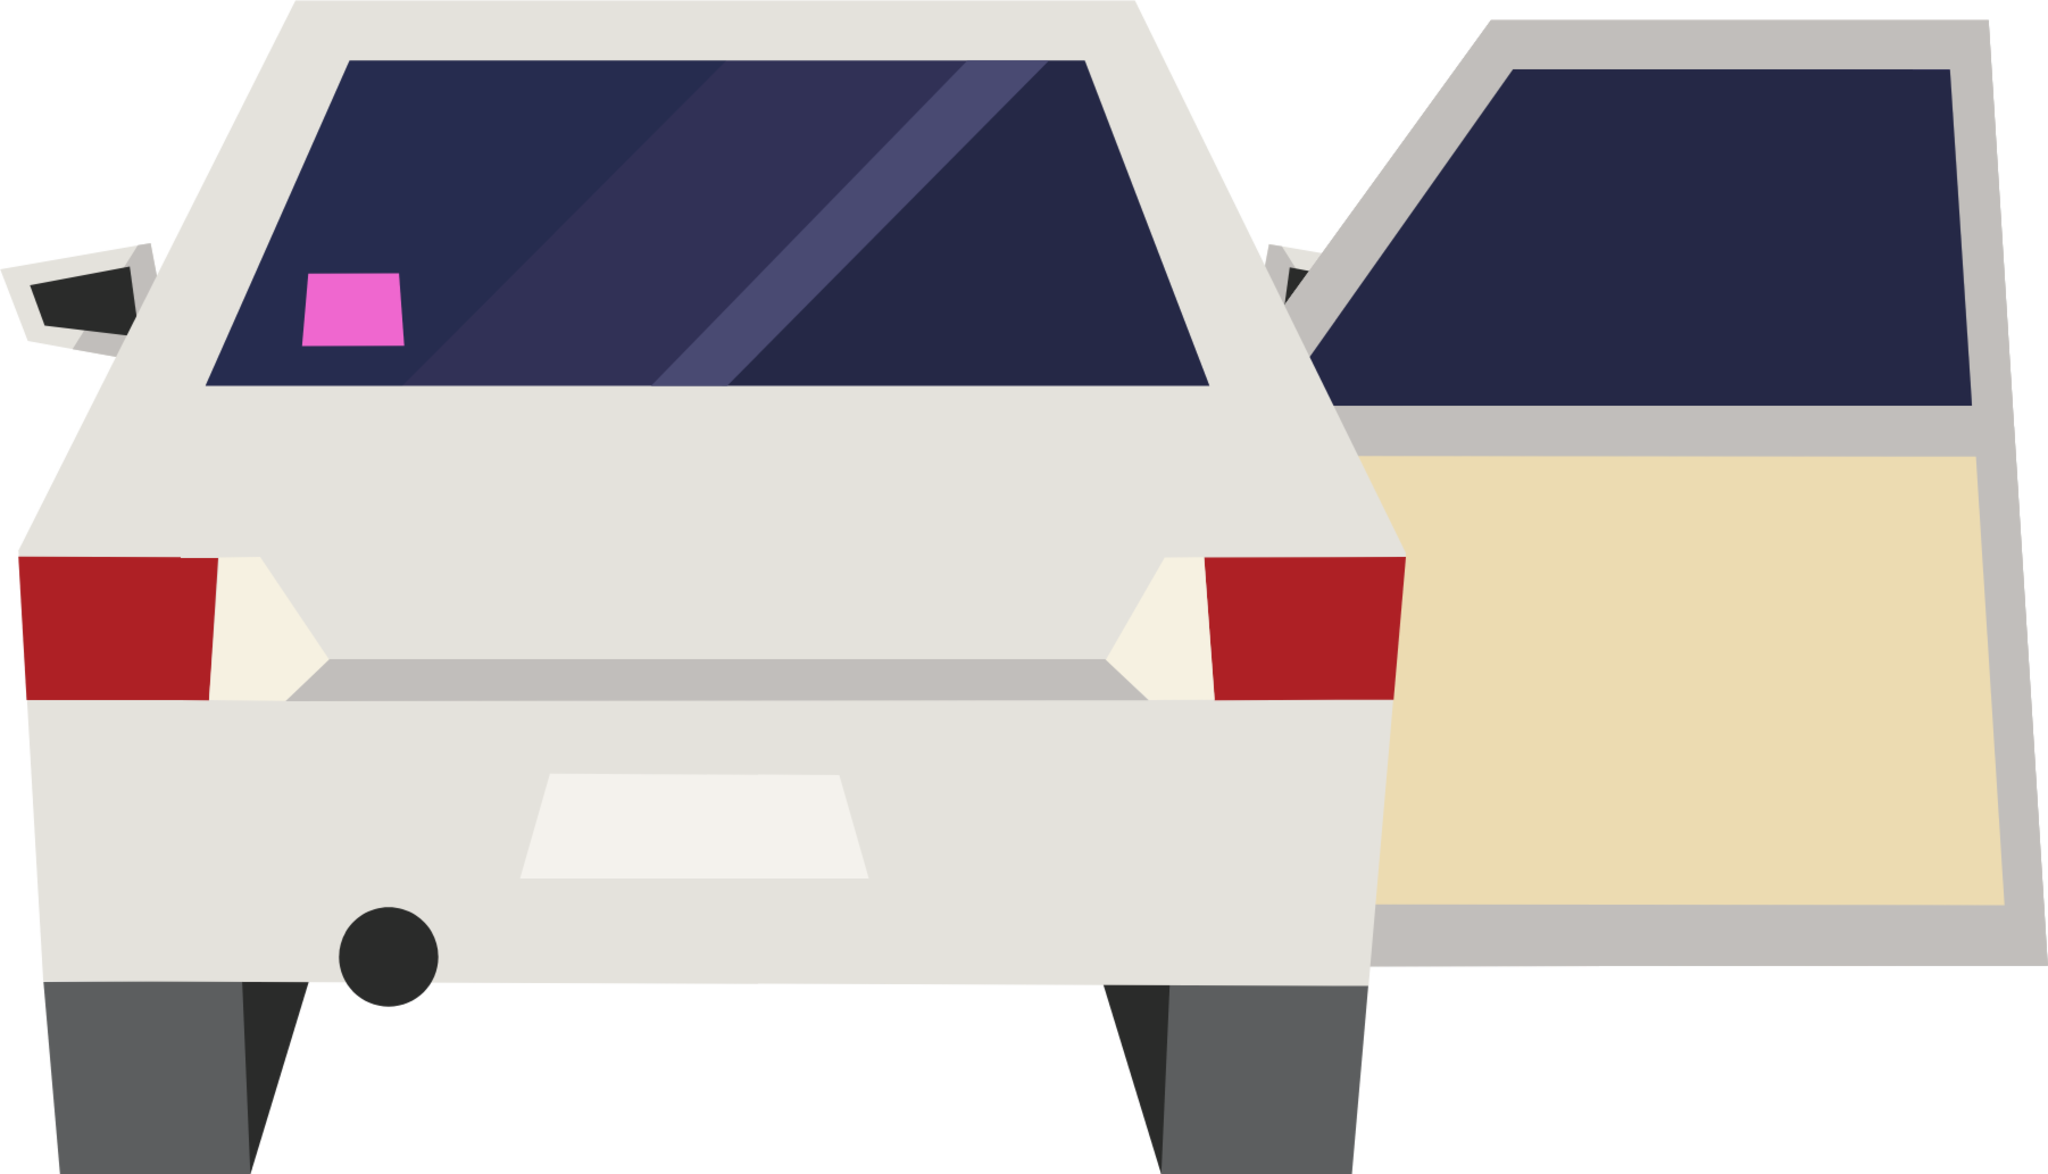 rideshare outbound door right illustration